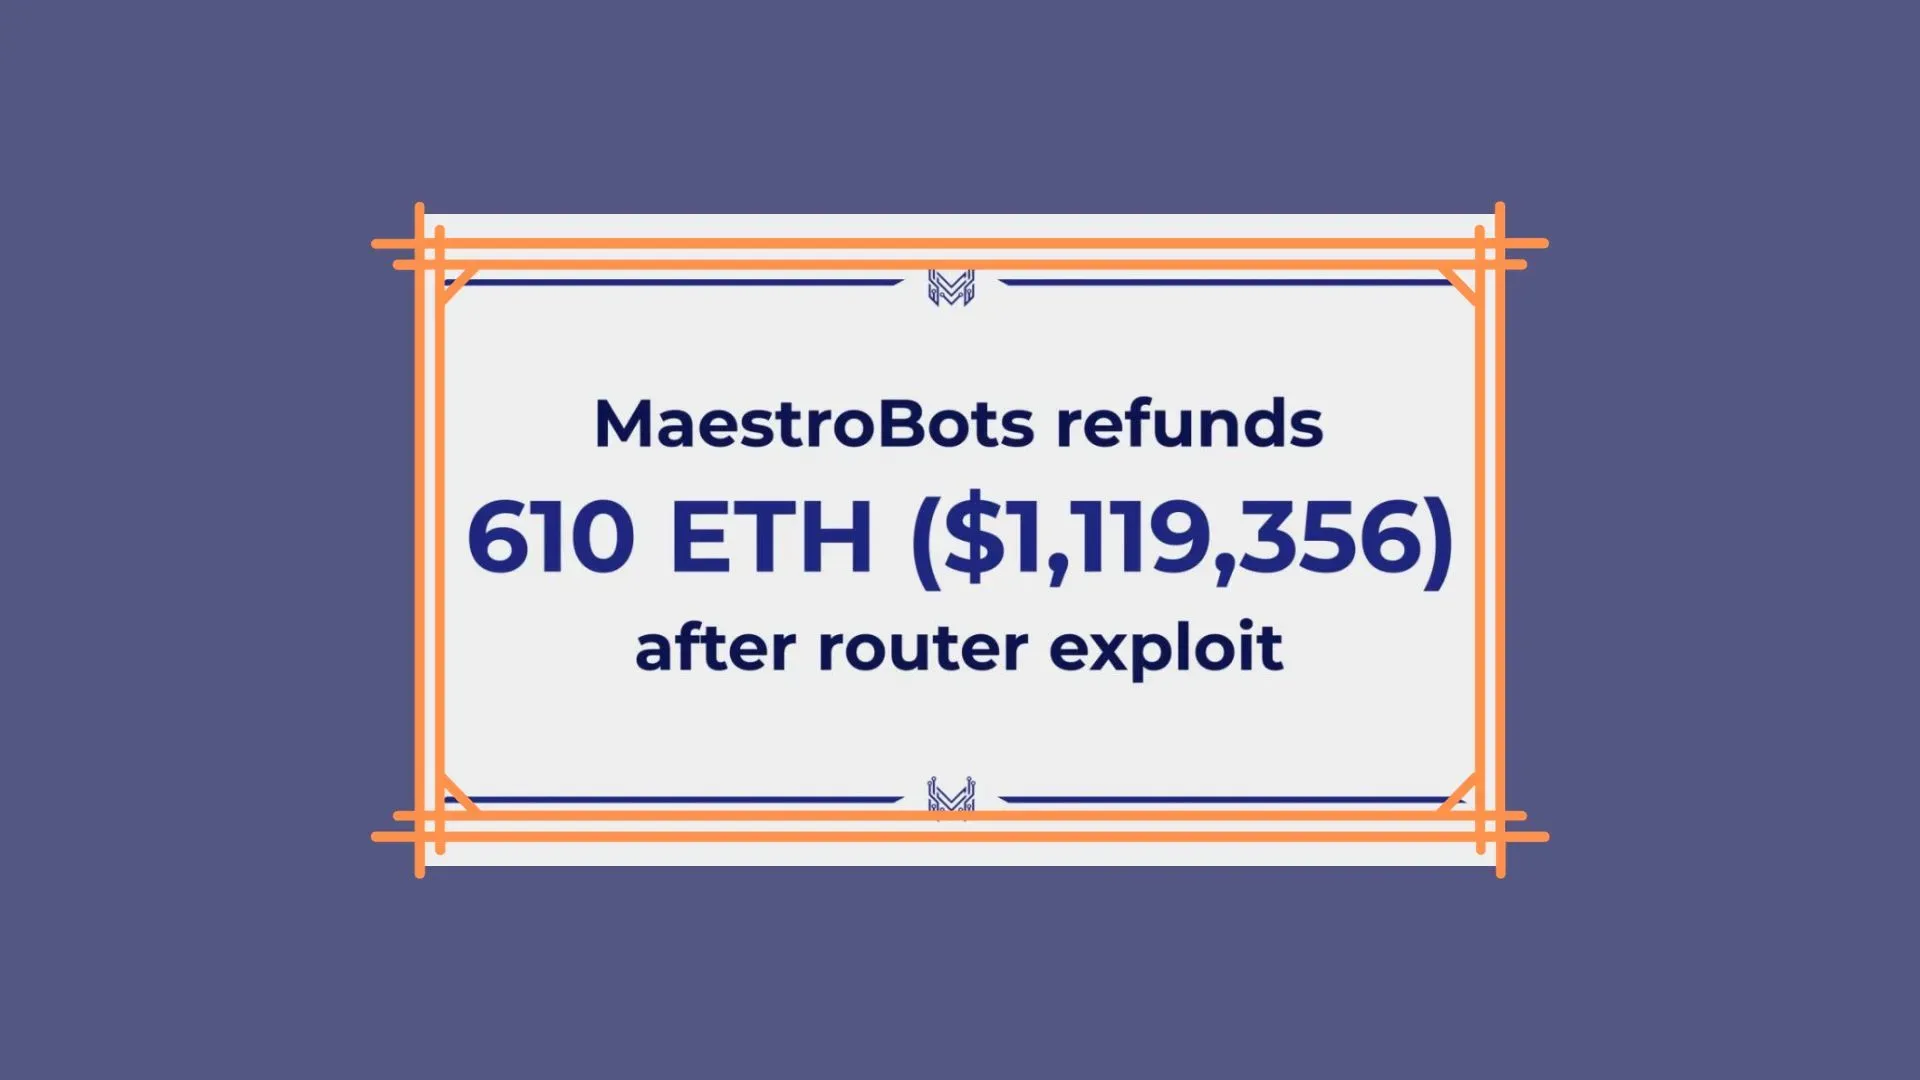 MaestroBots Acts Fast To Refund $1M To Users Post-Exploit